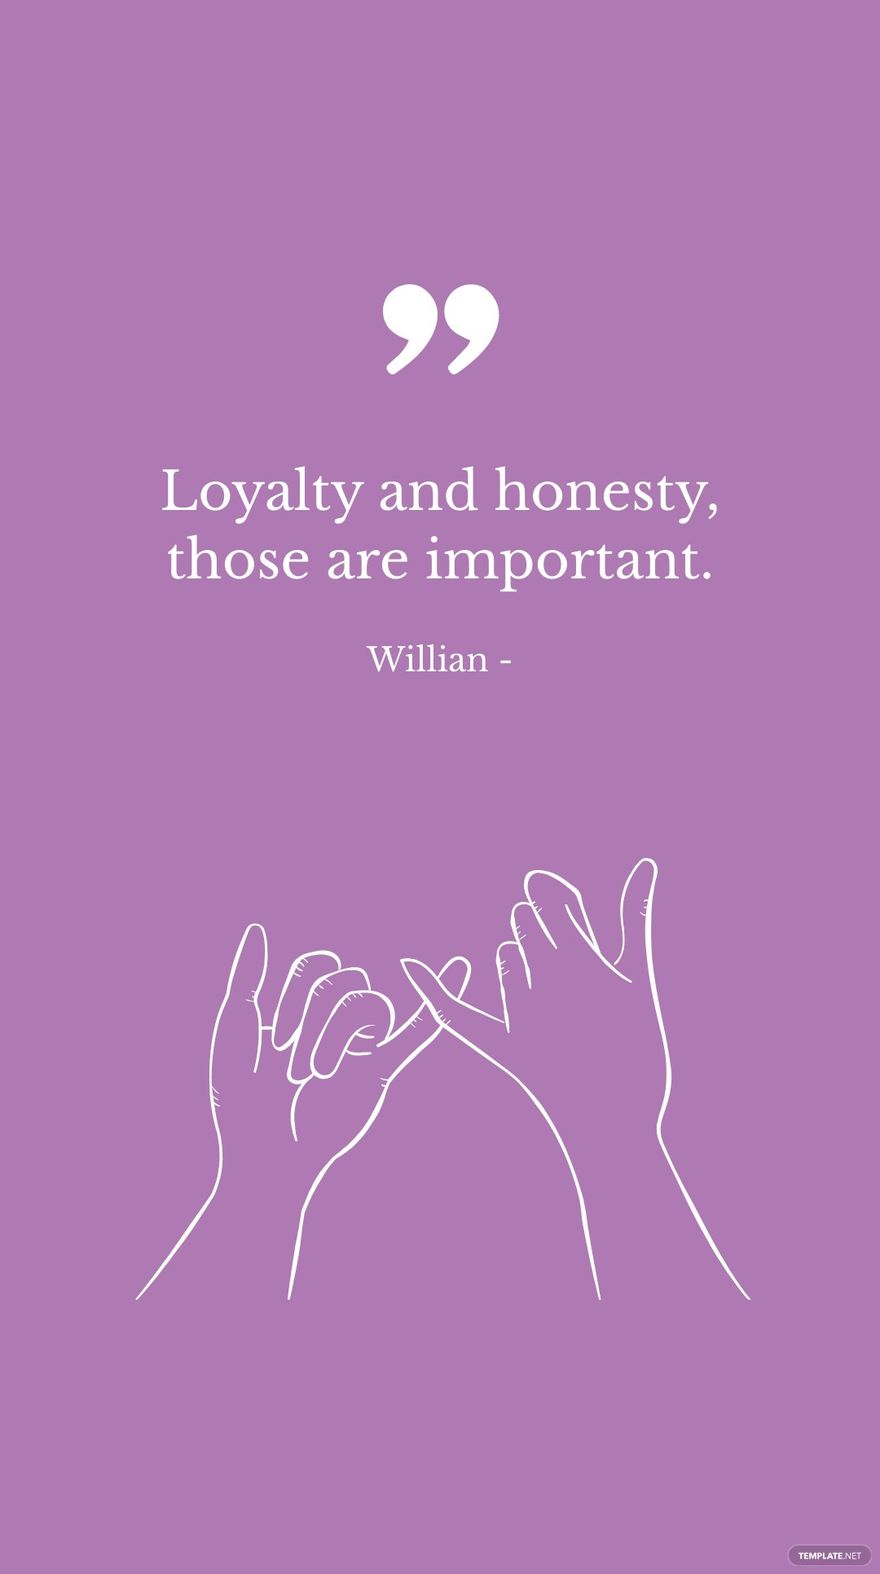 Free Willian - Loyalty and honesty, those are important. in JPG